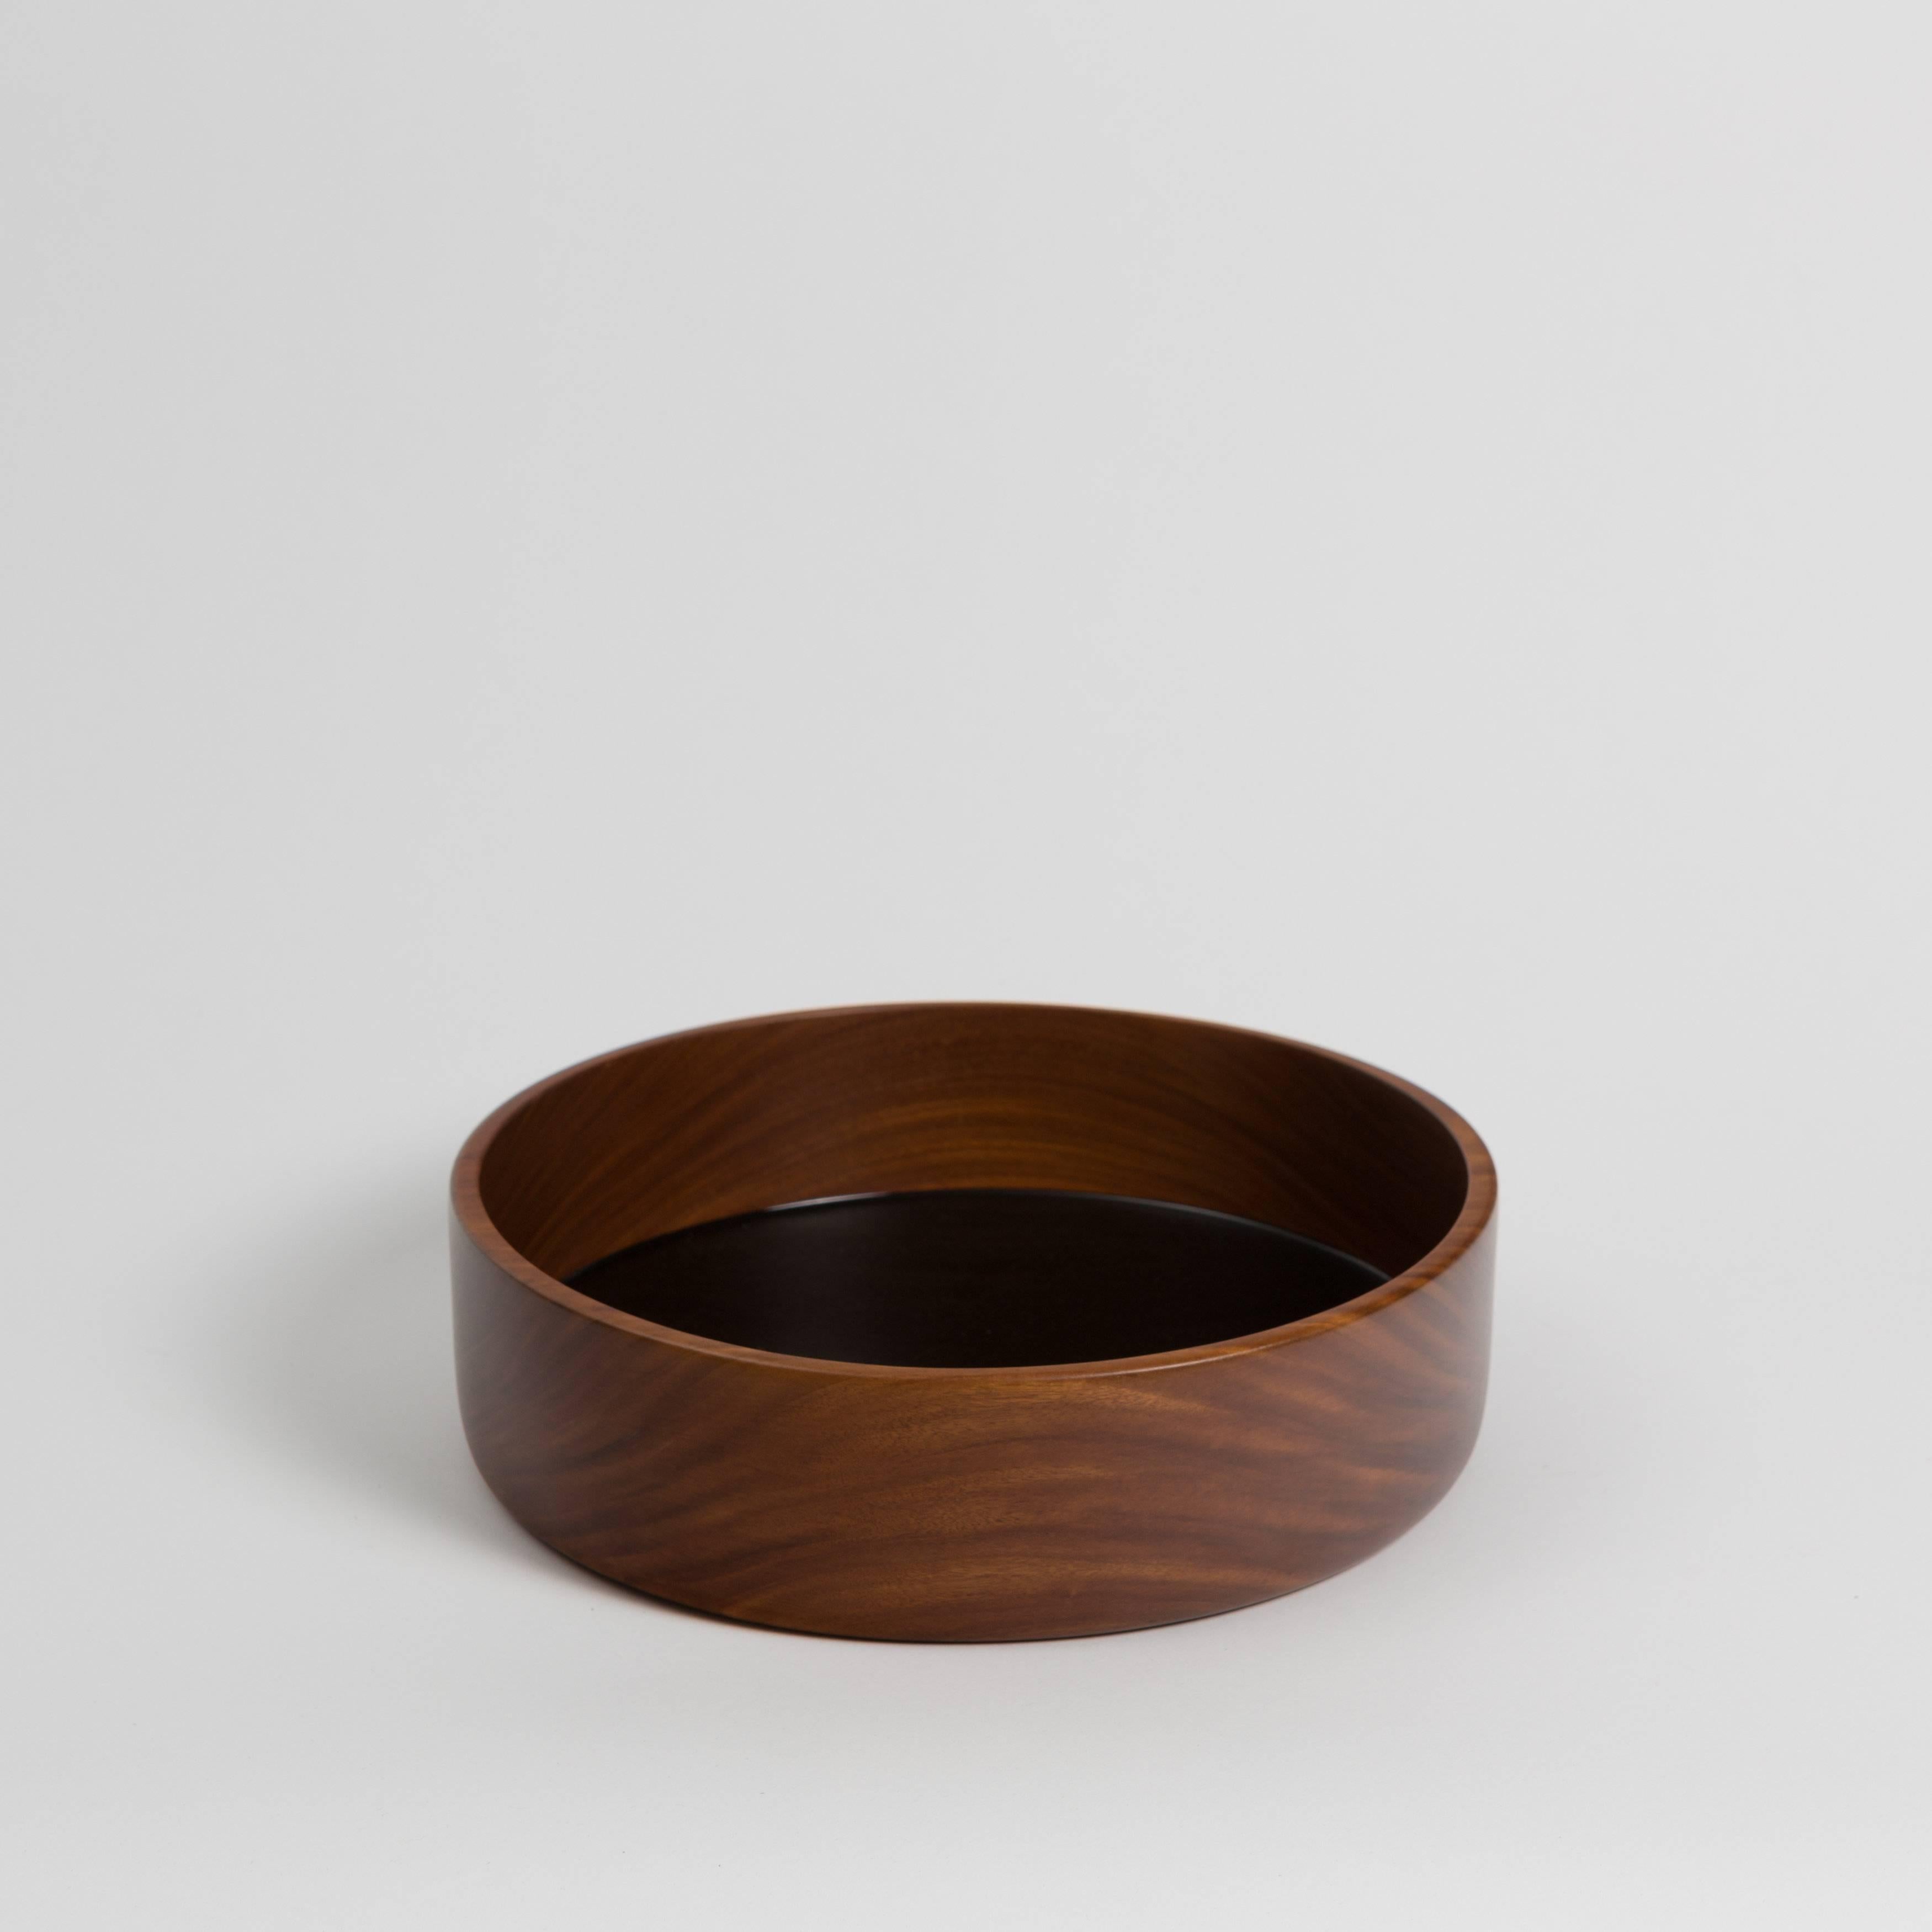 Hand-carved reflective bowl made from a rare wood called corteza lingnum vitae-harvested from fallen trees. Design by Gabriela Valenzuela-Hirsch, 2017. Made exclusively for a show at reGeneration called Two Mundos.